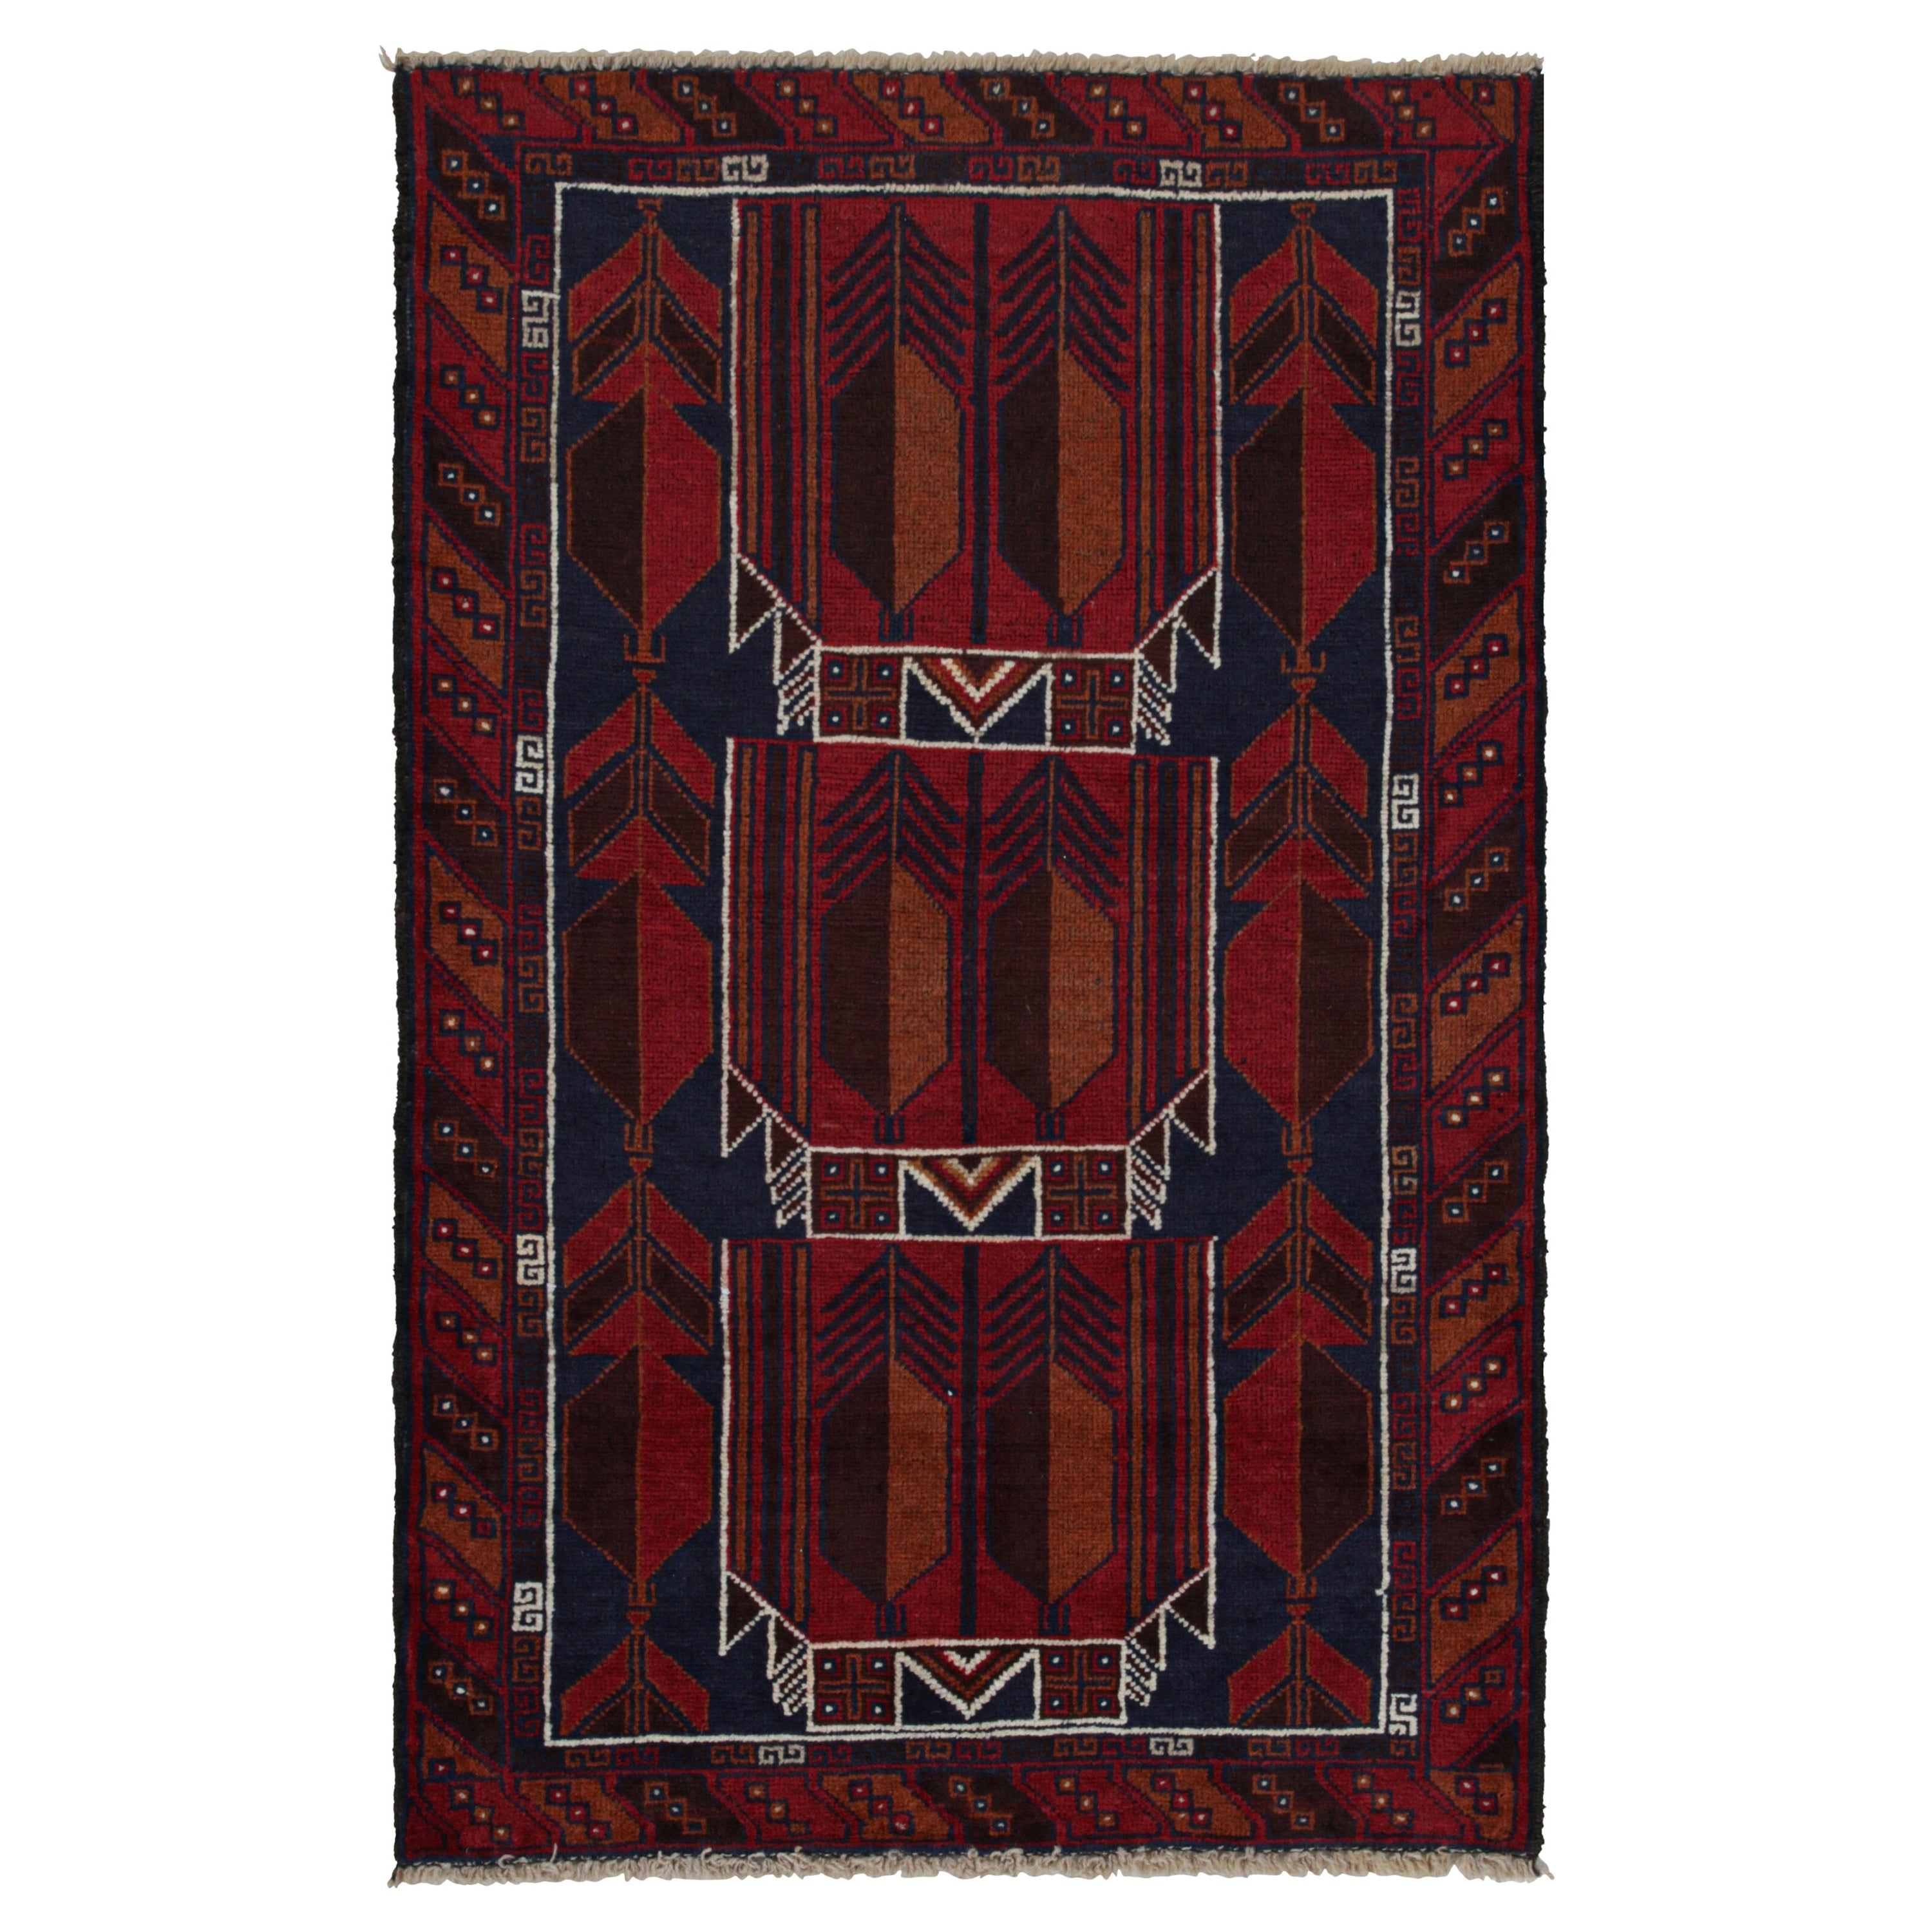 Vintage Baluch Persian rug in Red, Blue, Brown Tribal Patterns from Rug & Kilim